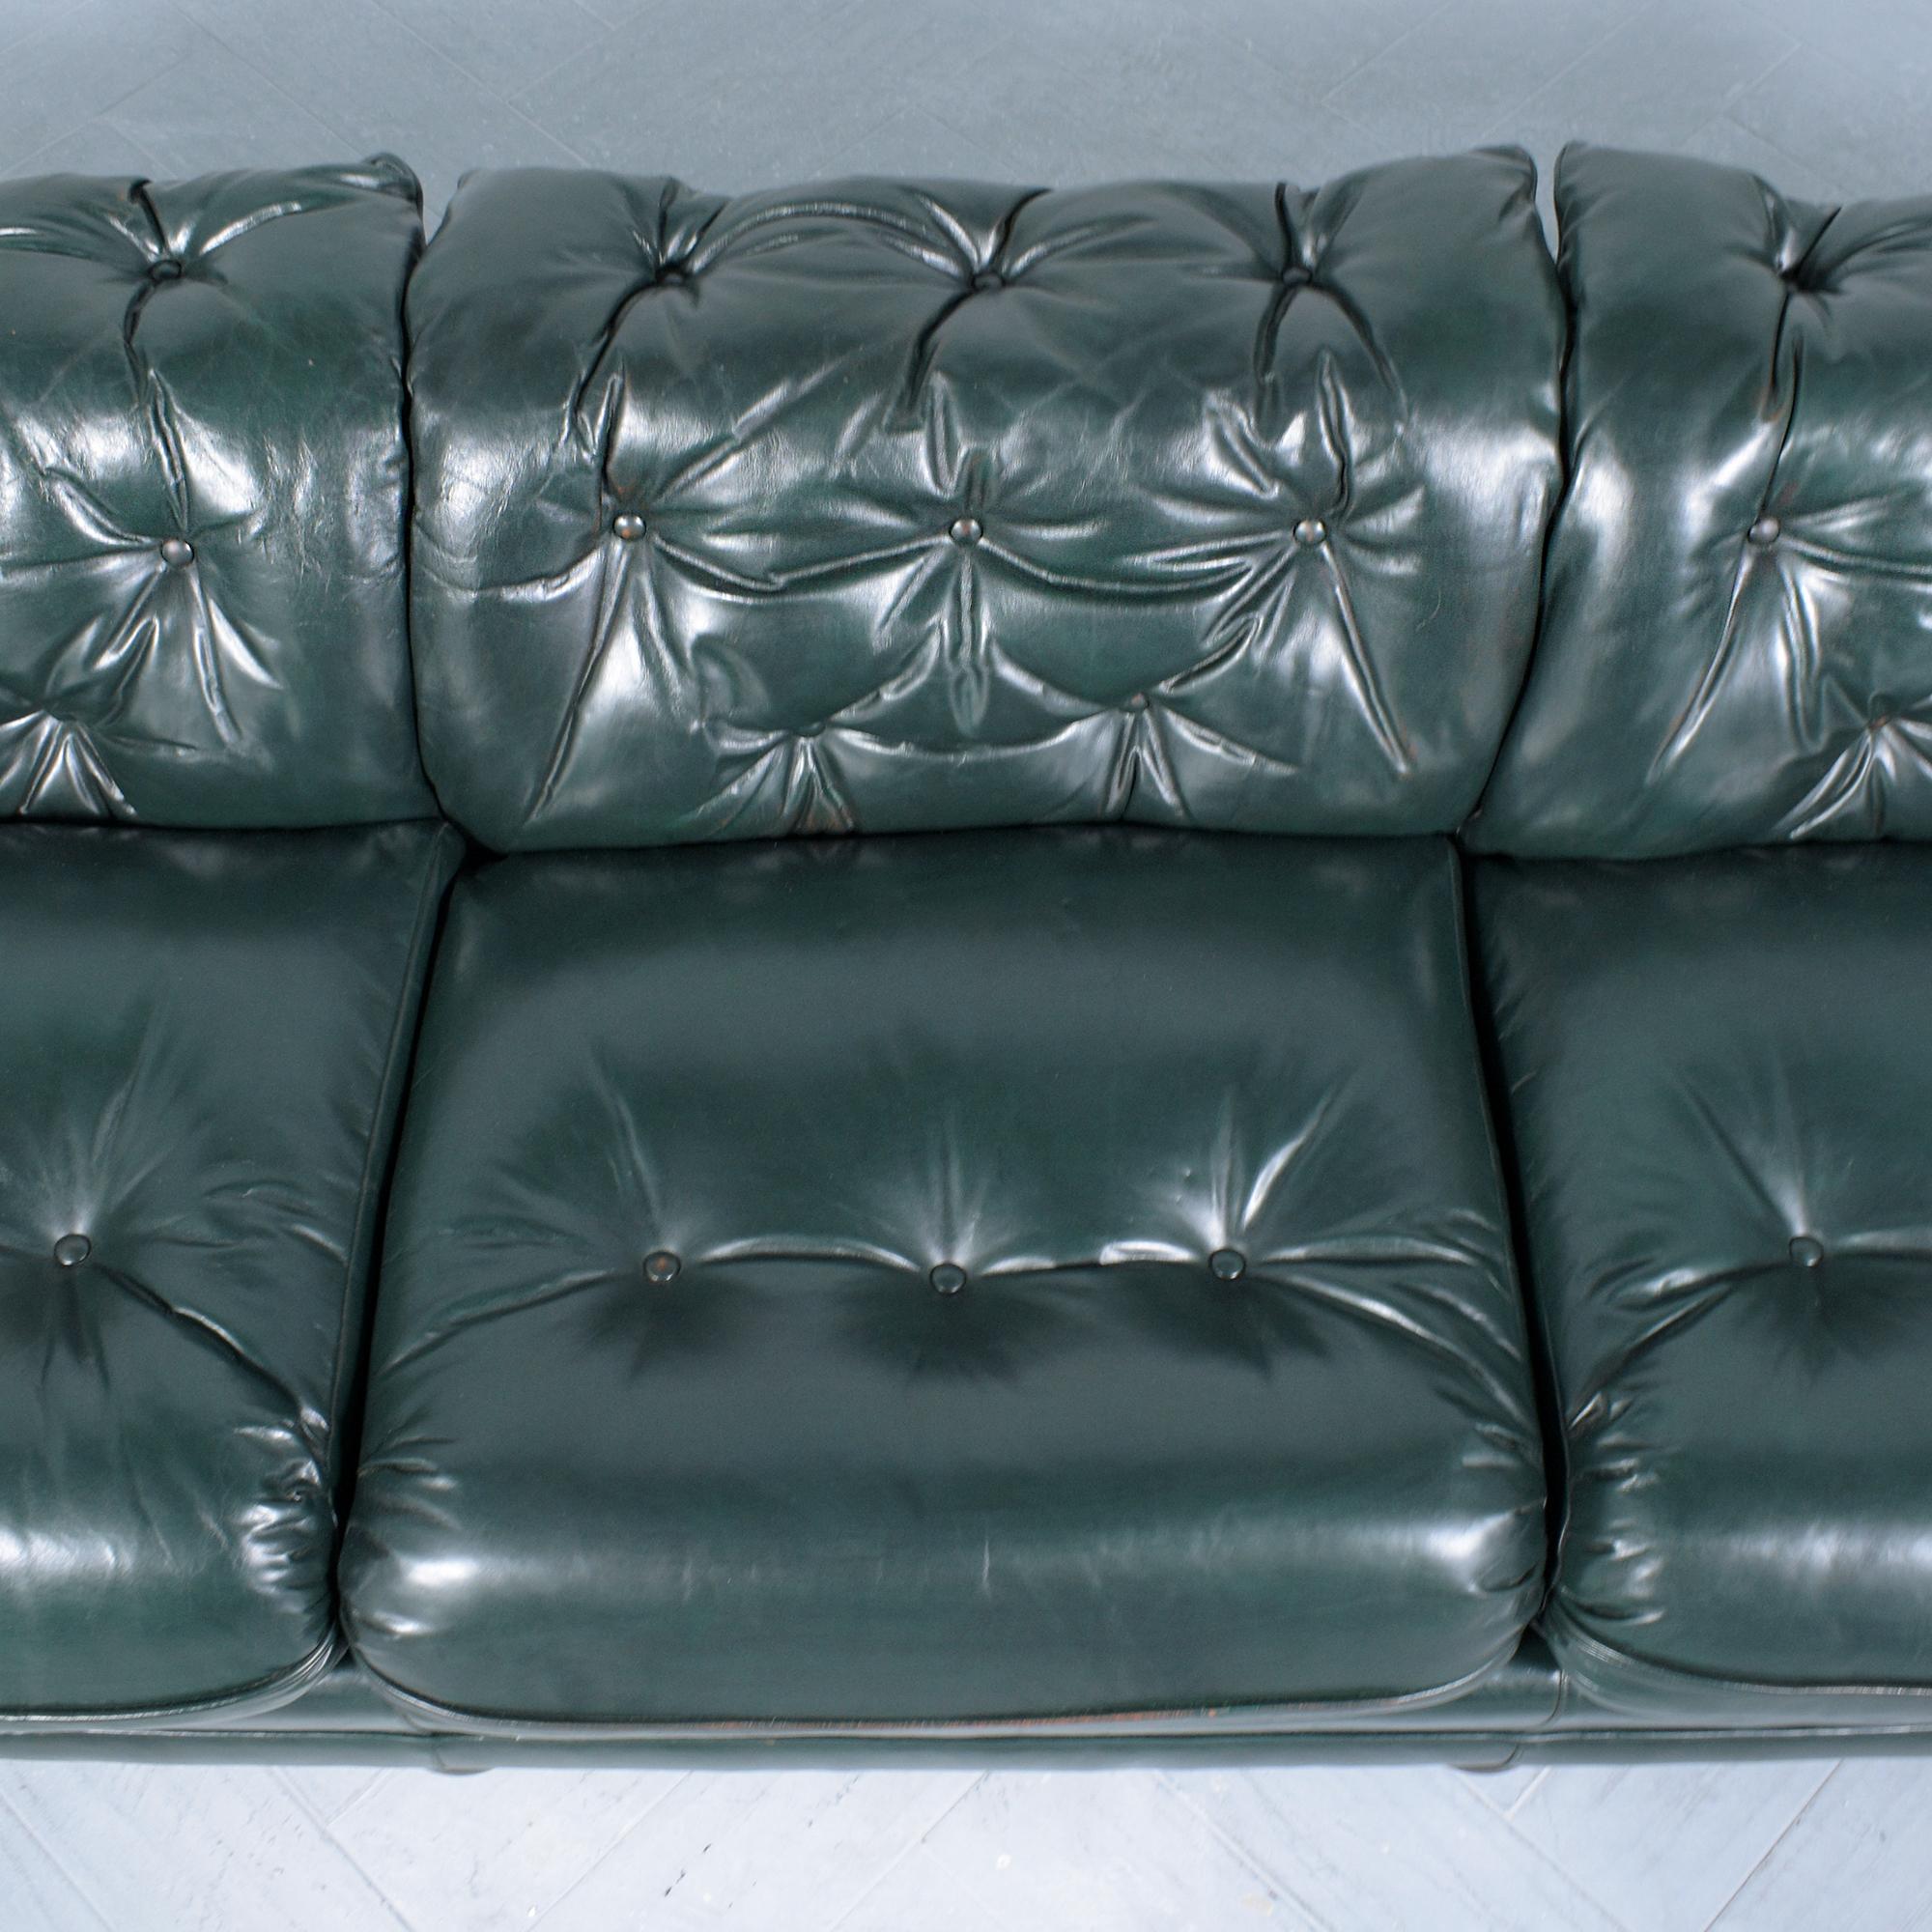 1960s Vintage Emerald Green Tufted Chesterfield Leather Sofa 2